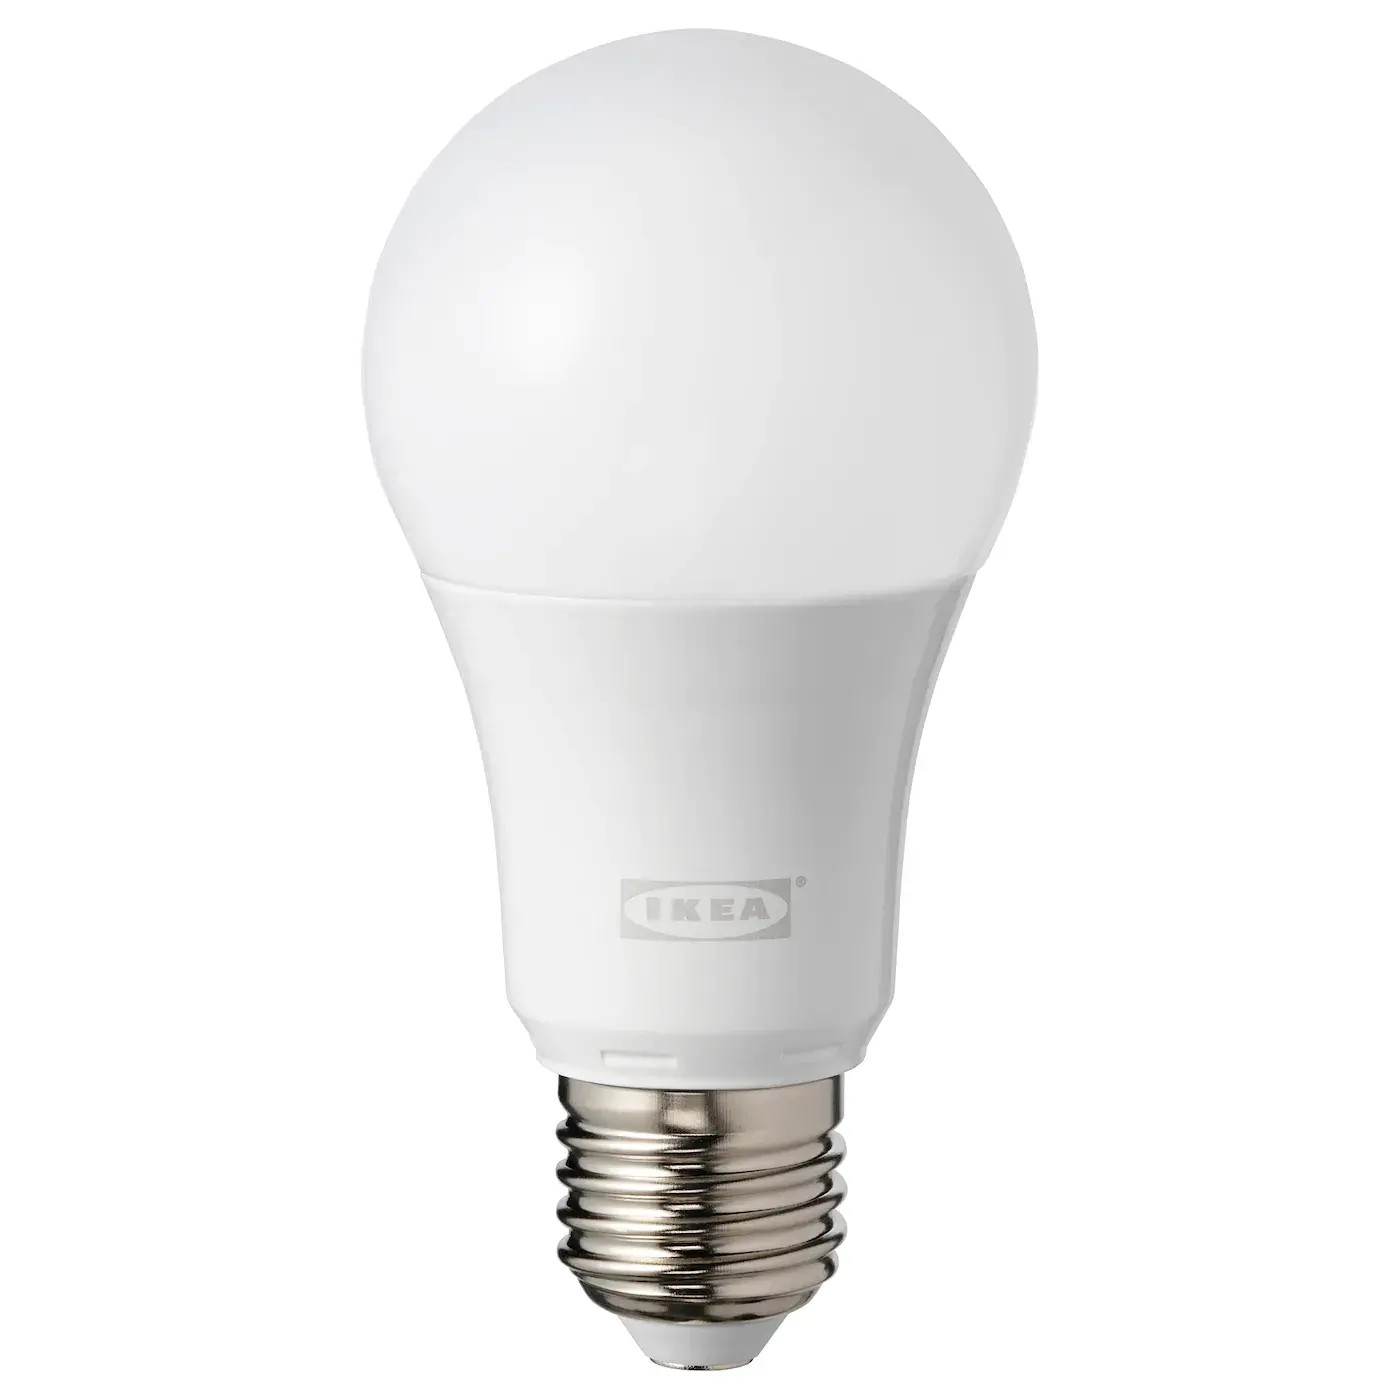 Tradfri LED bulb E27 600lm, dimmable colour and white spectrum opal ...